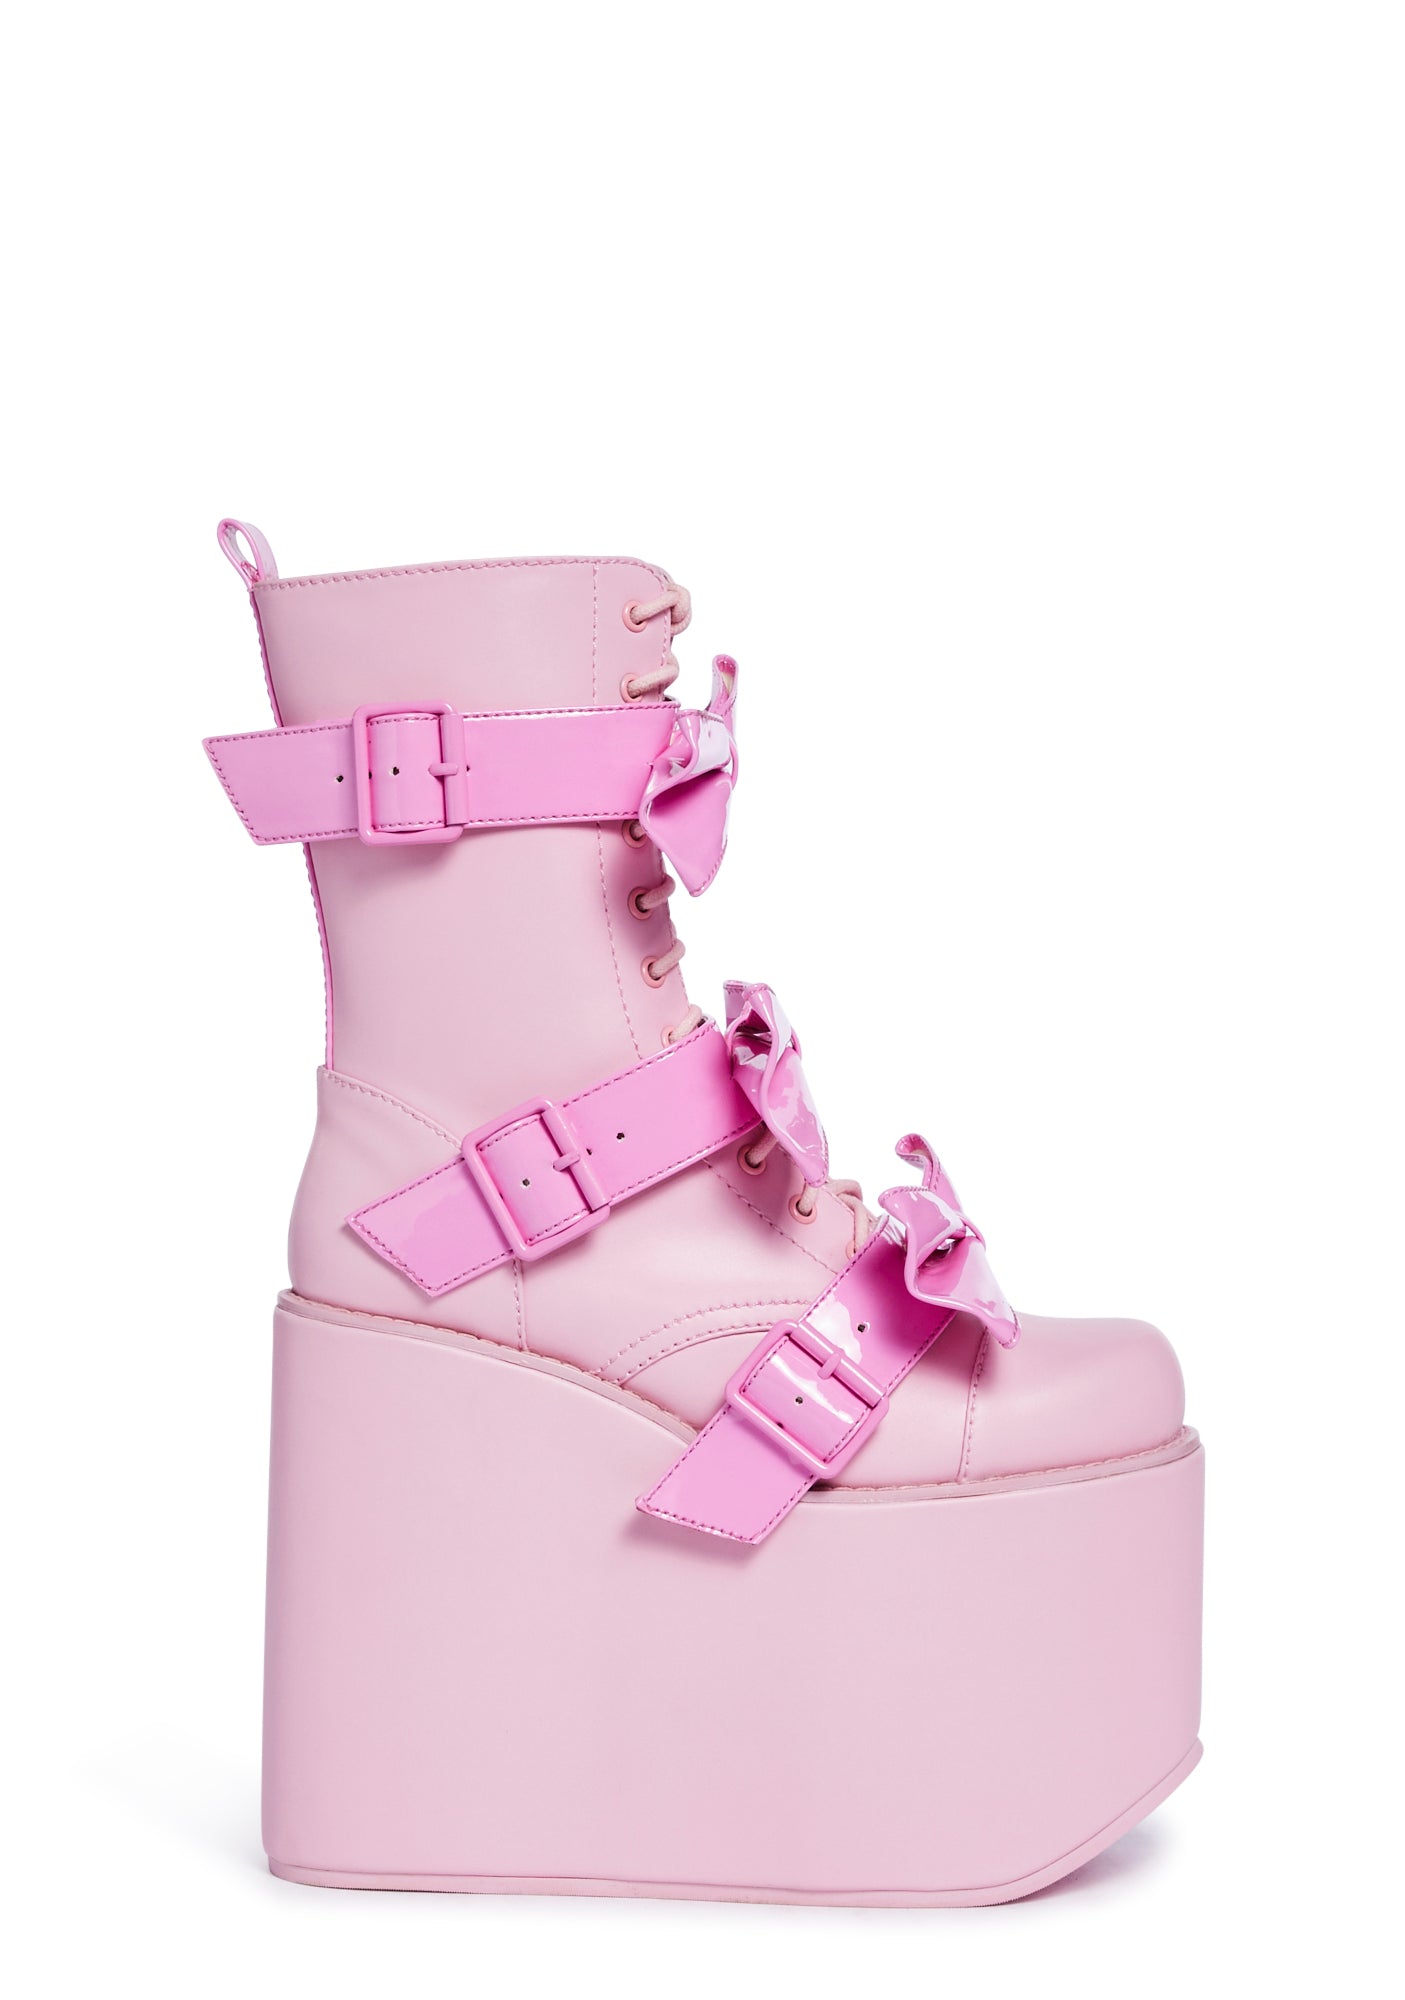 Sugar Thrillz Vegan Leather Patent Bows Boots - Pink